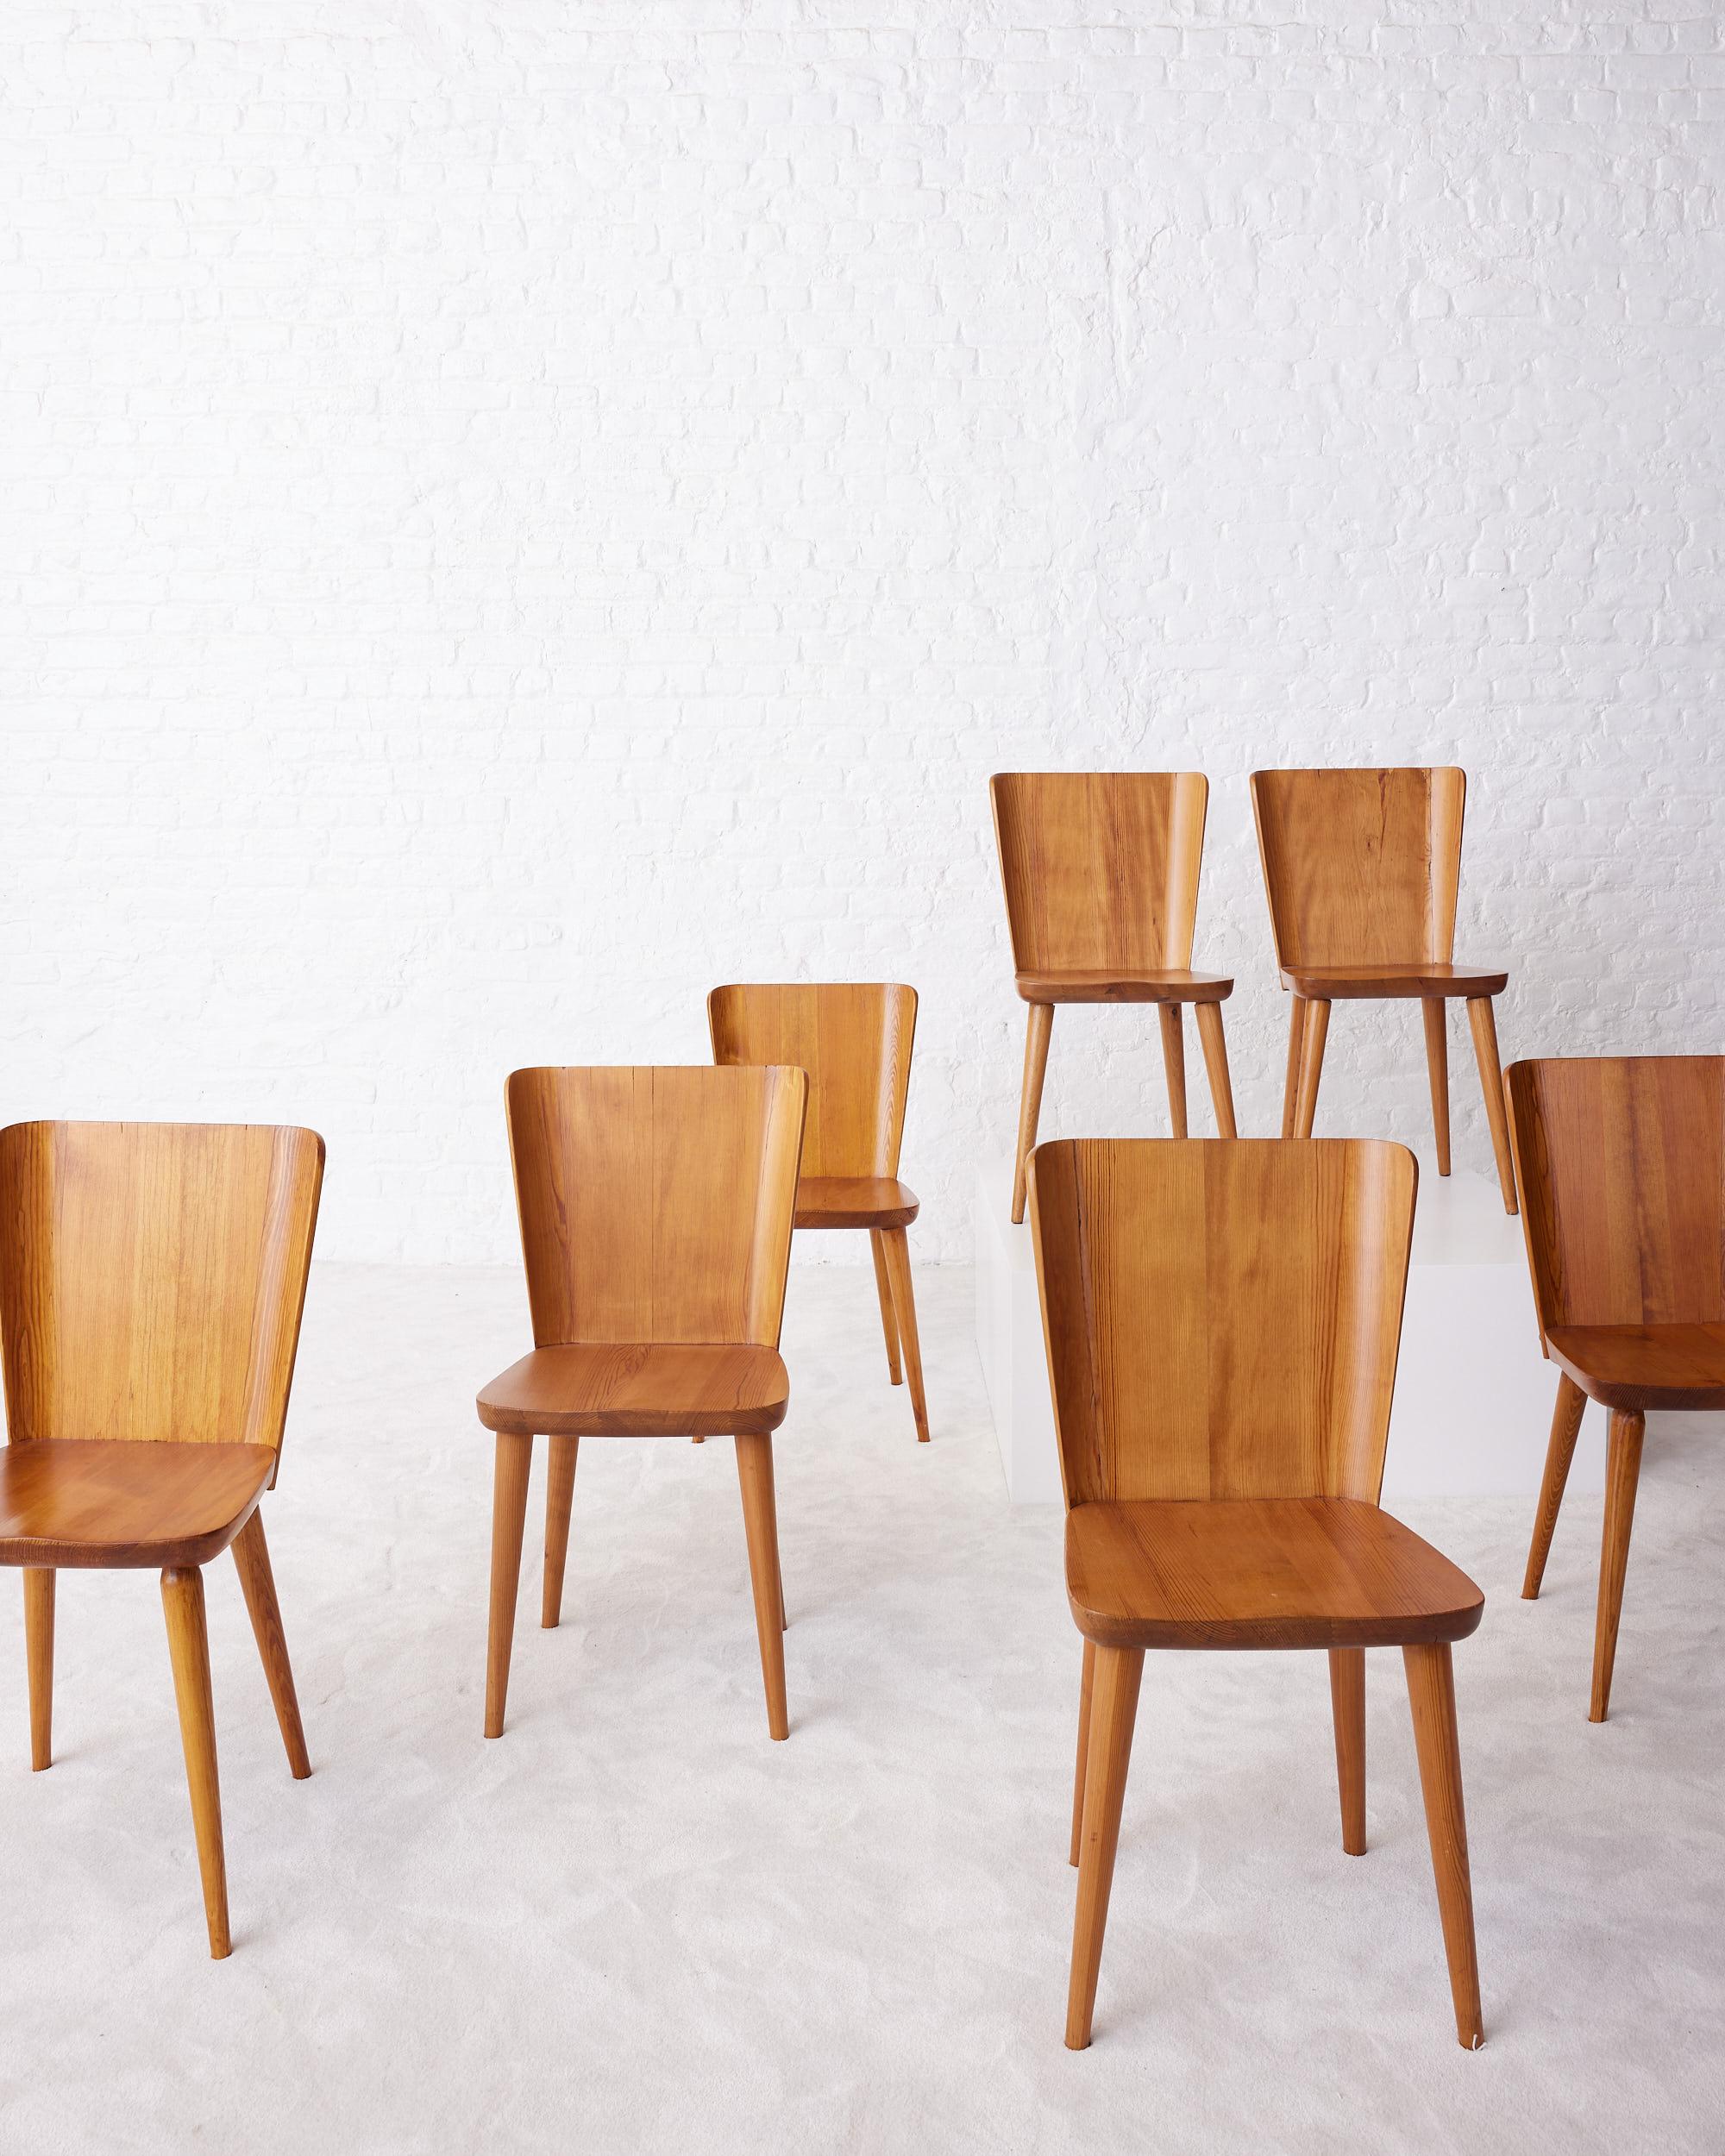 Chairs designed by Goran Malmvall for Karl Anderson & Soner, in the 1950s, with a solid pine seat and base. The backrests run wide near the highest and consist of straight and slightly curved near the ends.
The Swedish dining chairs hold a powerful